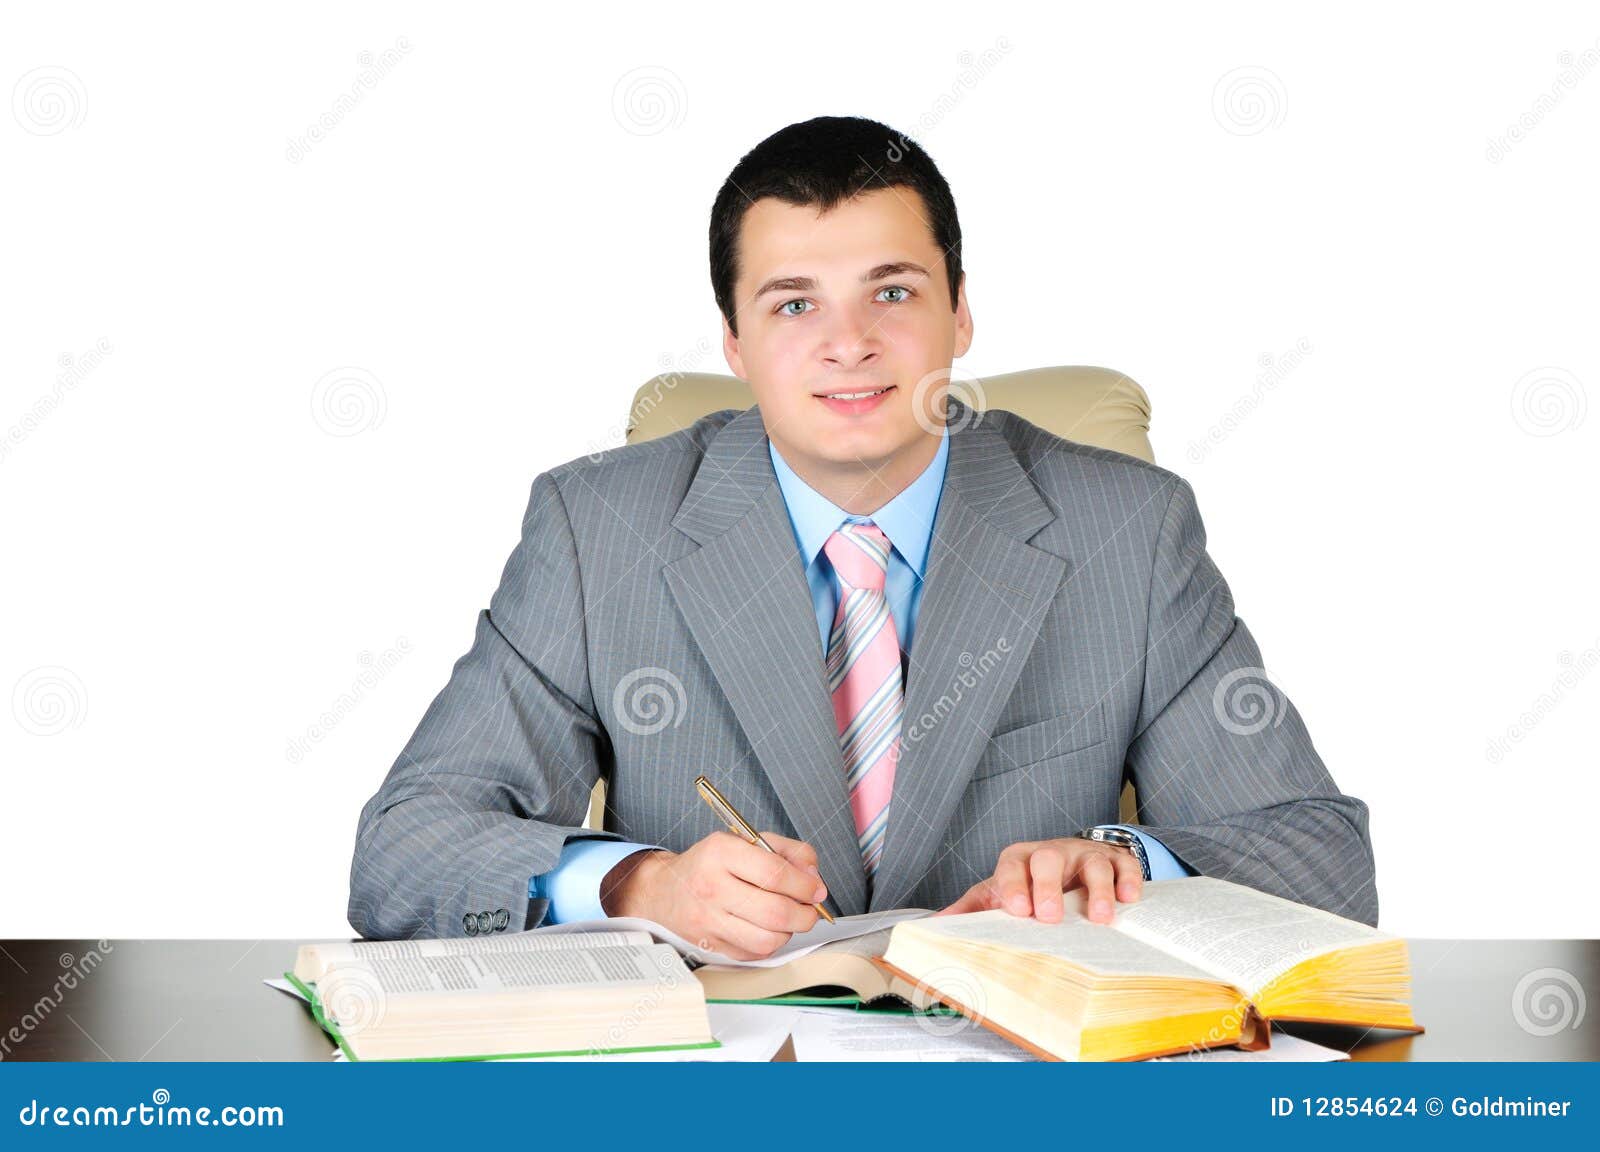 Business Man At Work Stock Images - Image: 12854624